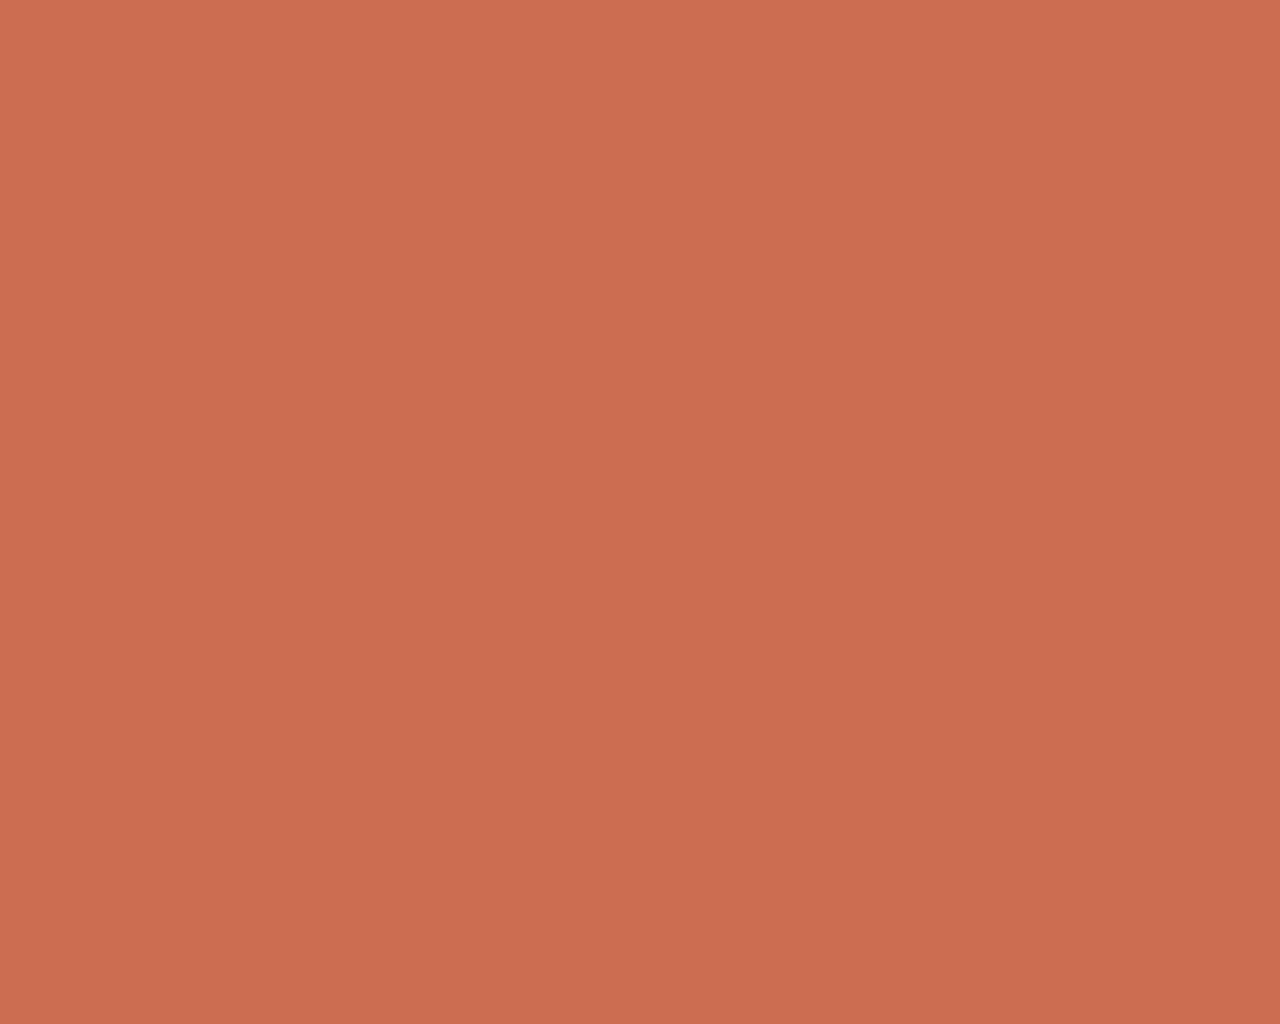 1280x1024 Copper Red Solid Color Background